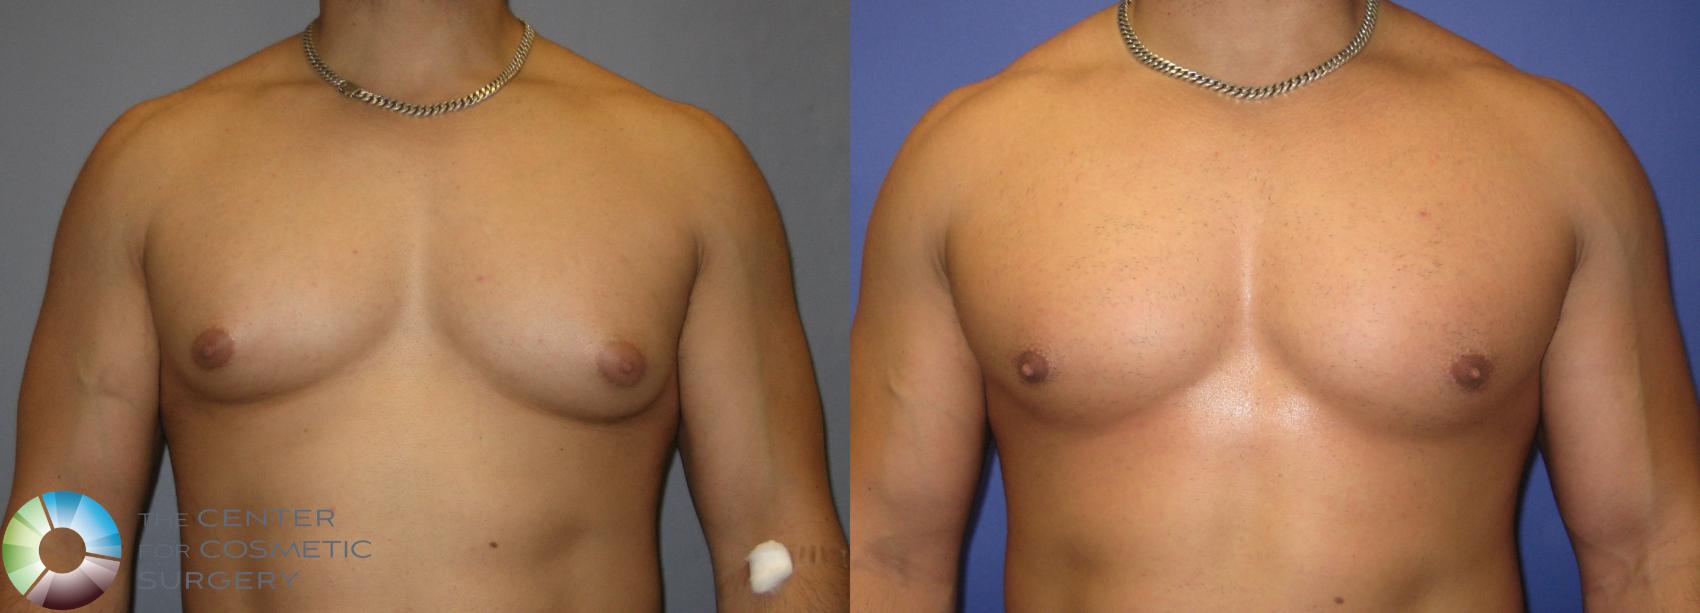 Before & After Liposuction Case 301 View #1 in Denver and Colorado Springs, CO